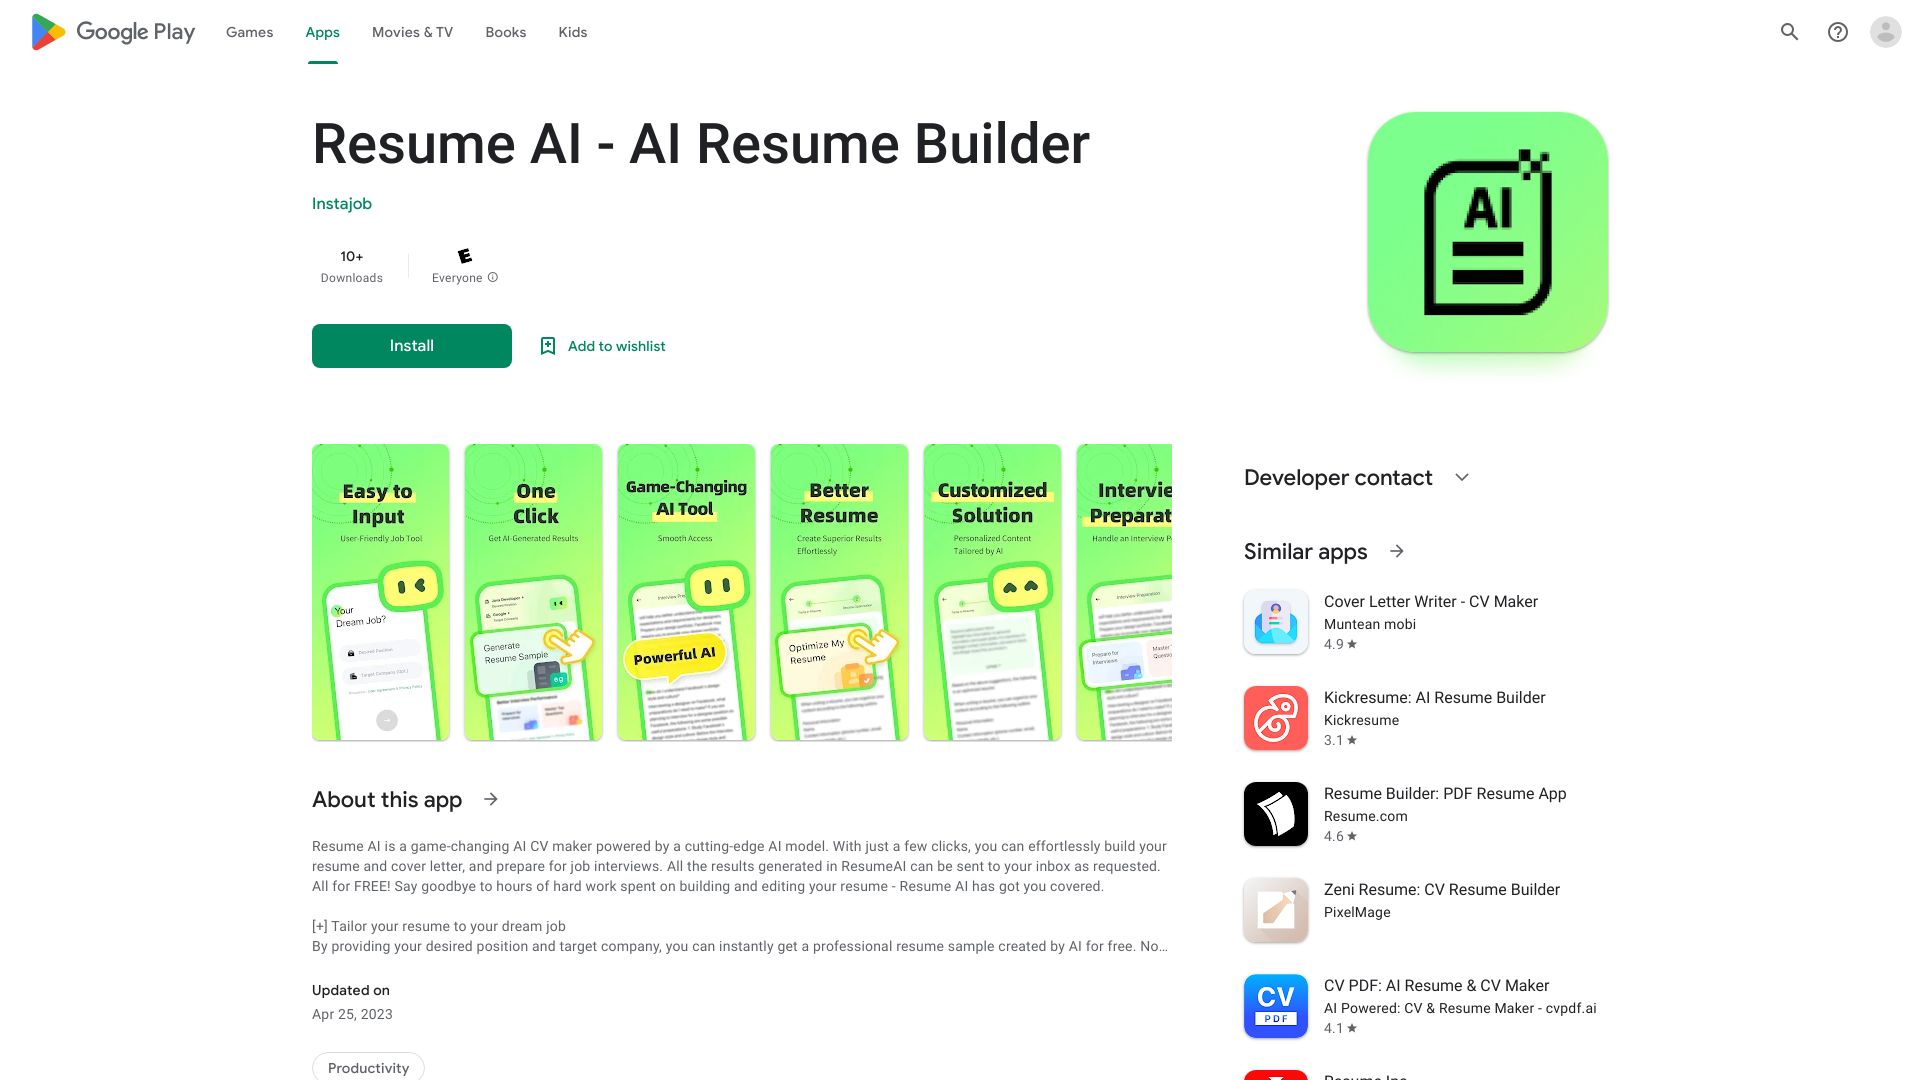 ResumeAI for Android